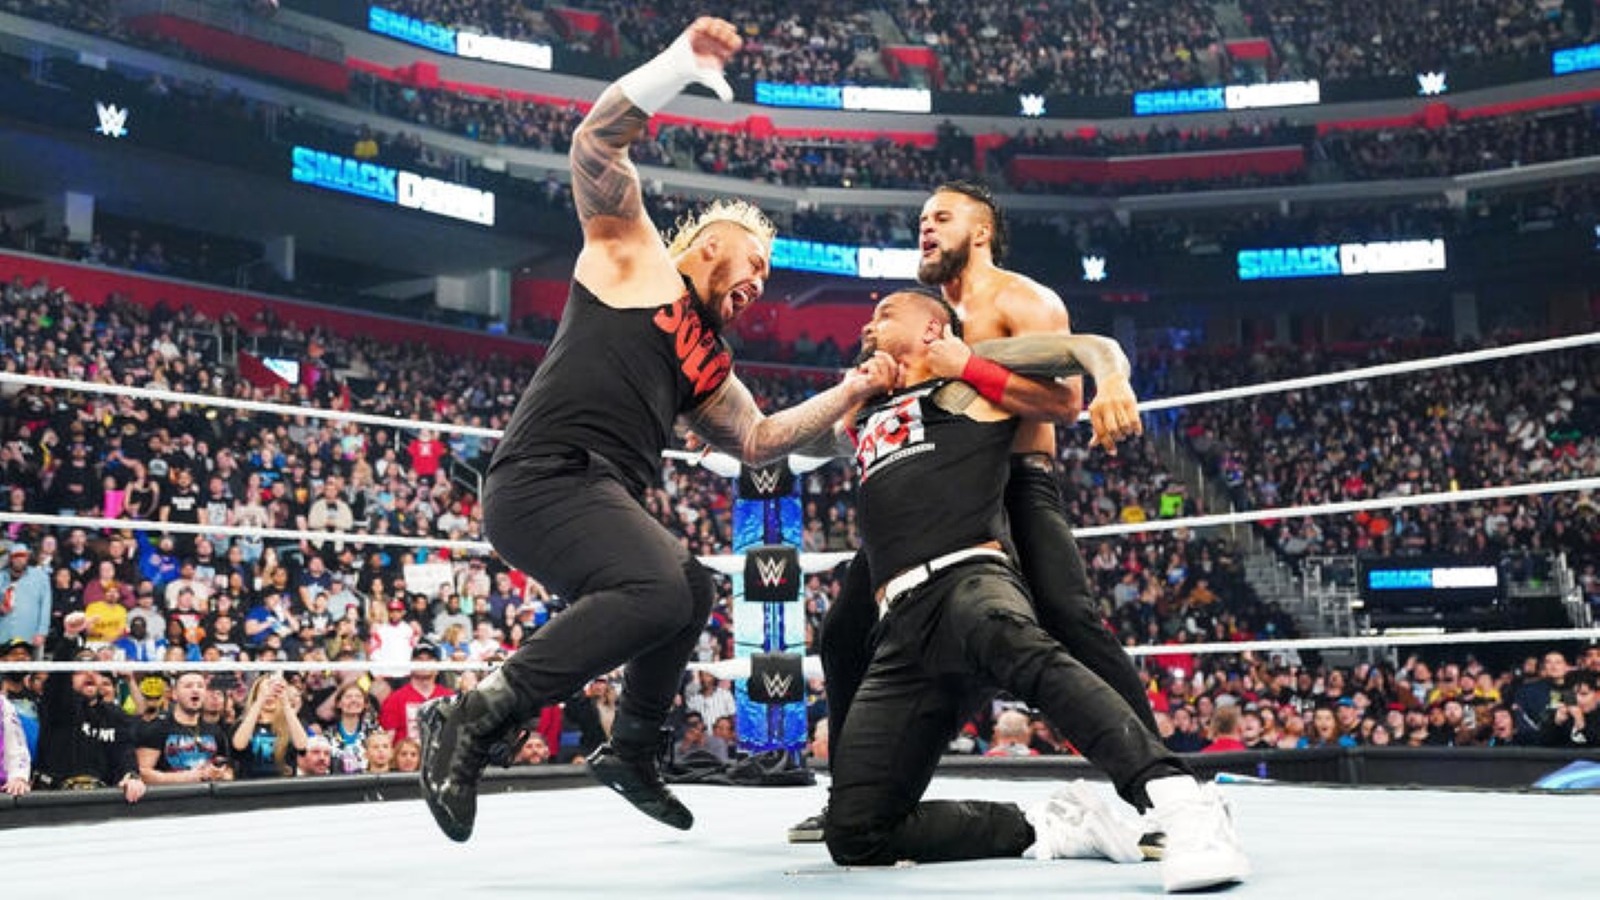 WWE Legend Rikishi Shares Odd Reaction To Son Jimmy Uso Being Destroyed On SmackDown